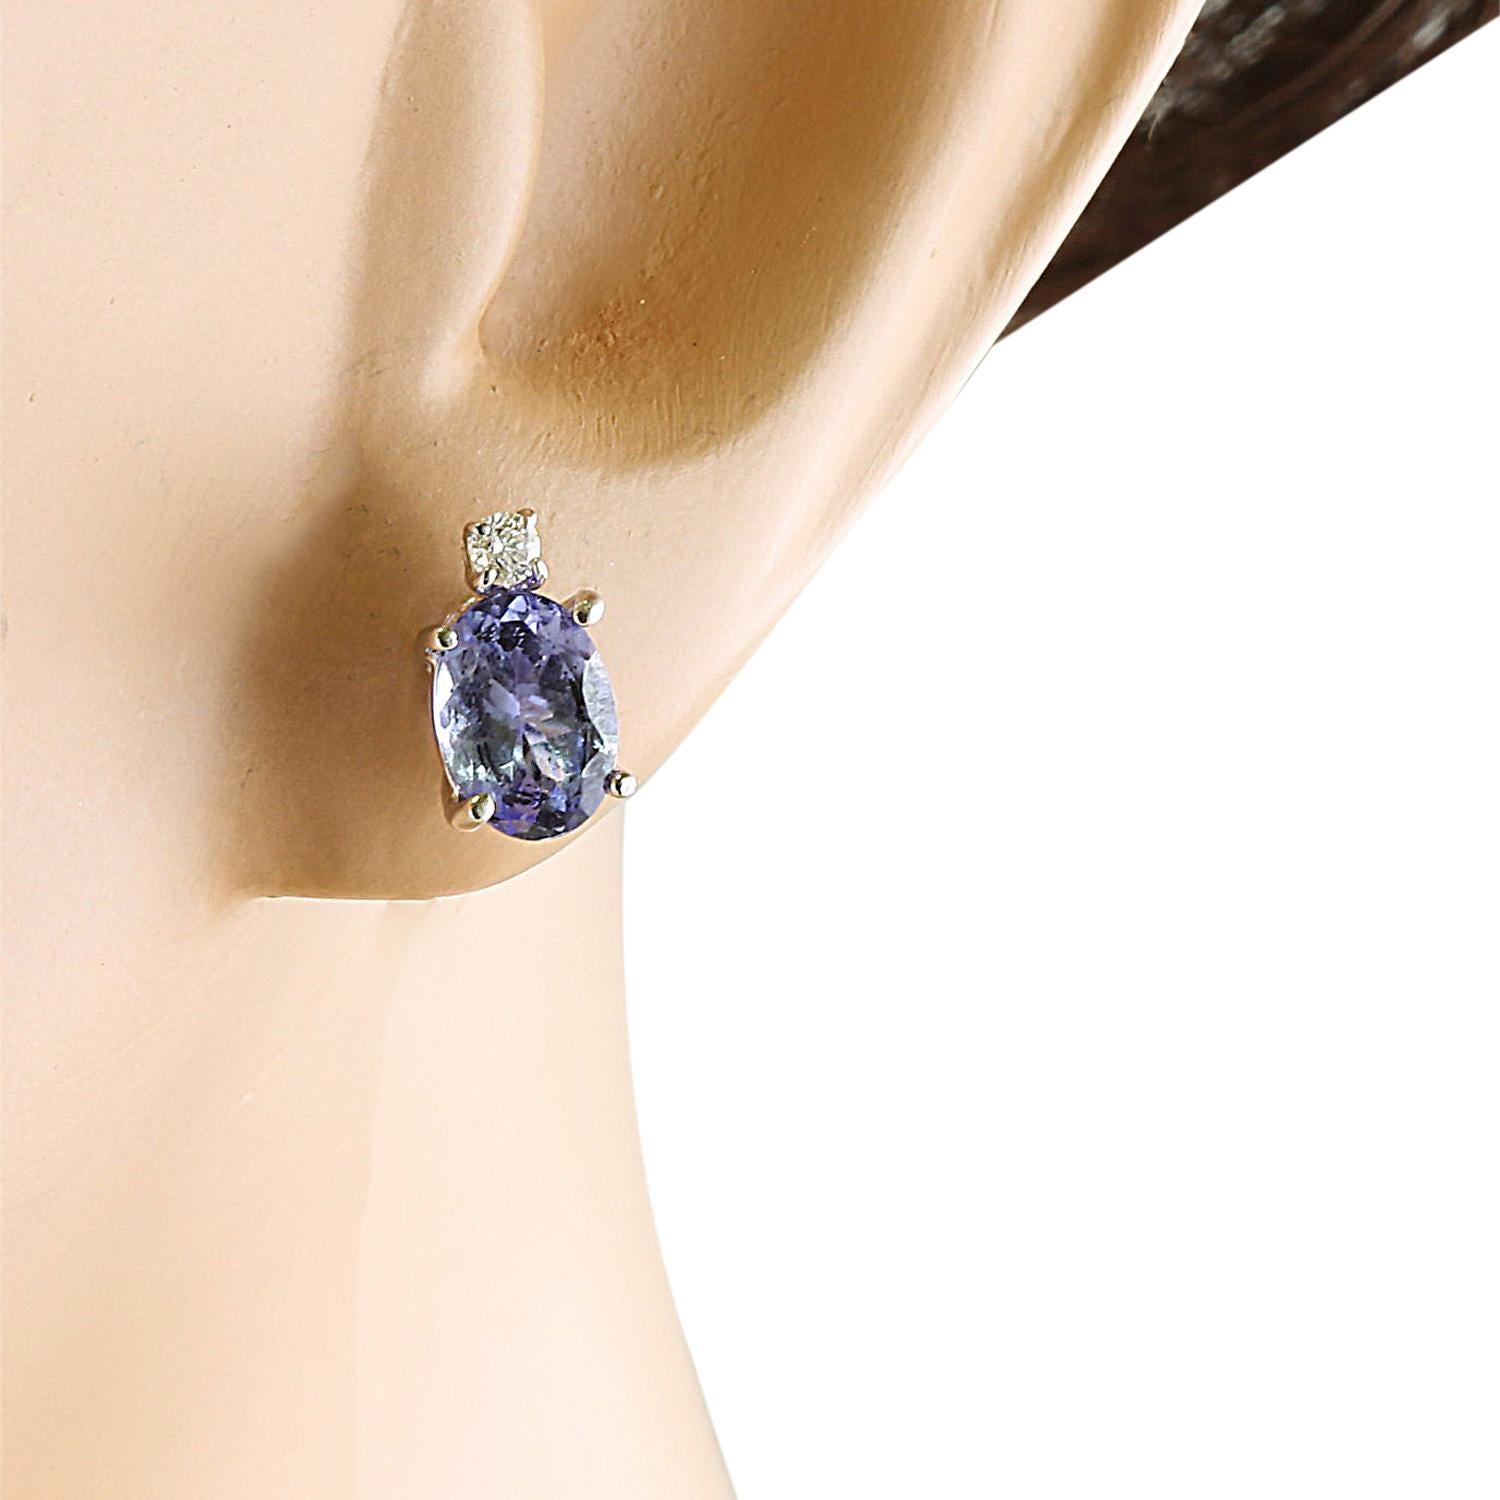 3.26 Carat Natural Tanzanite 14 Karat Solid White Gold Diamond Earrings
Stamped: 14K 
Total Earrings Weight: 1.6 Grams 
Tanzanite Weight: 3.20 Carat (8.00x6.00 Millimeters)  
Quantity: 2
Diamond Weight: 0.06 Carat (F-G Color, VS2-SI1 Clarity